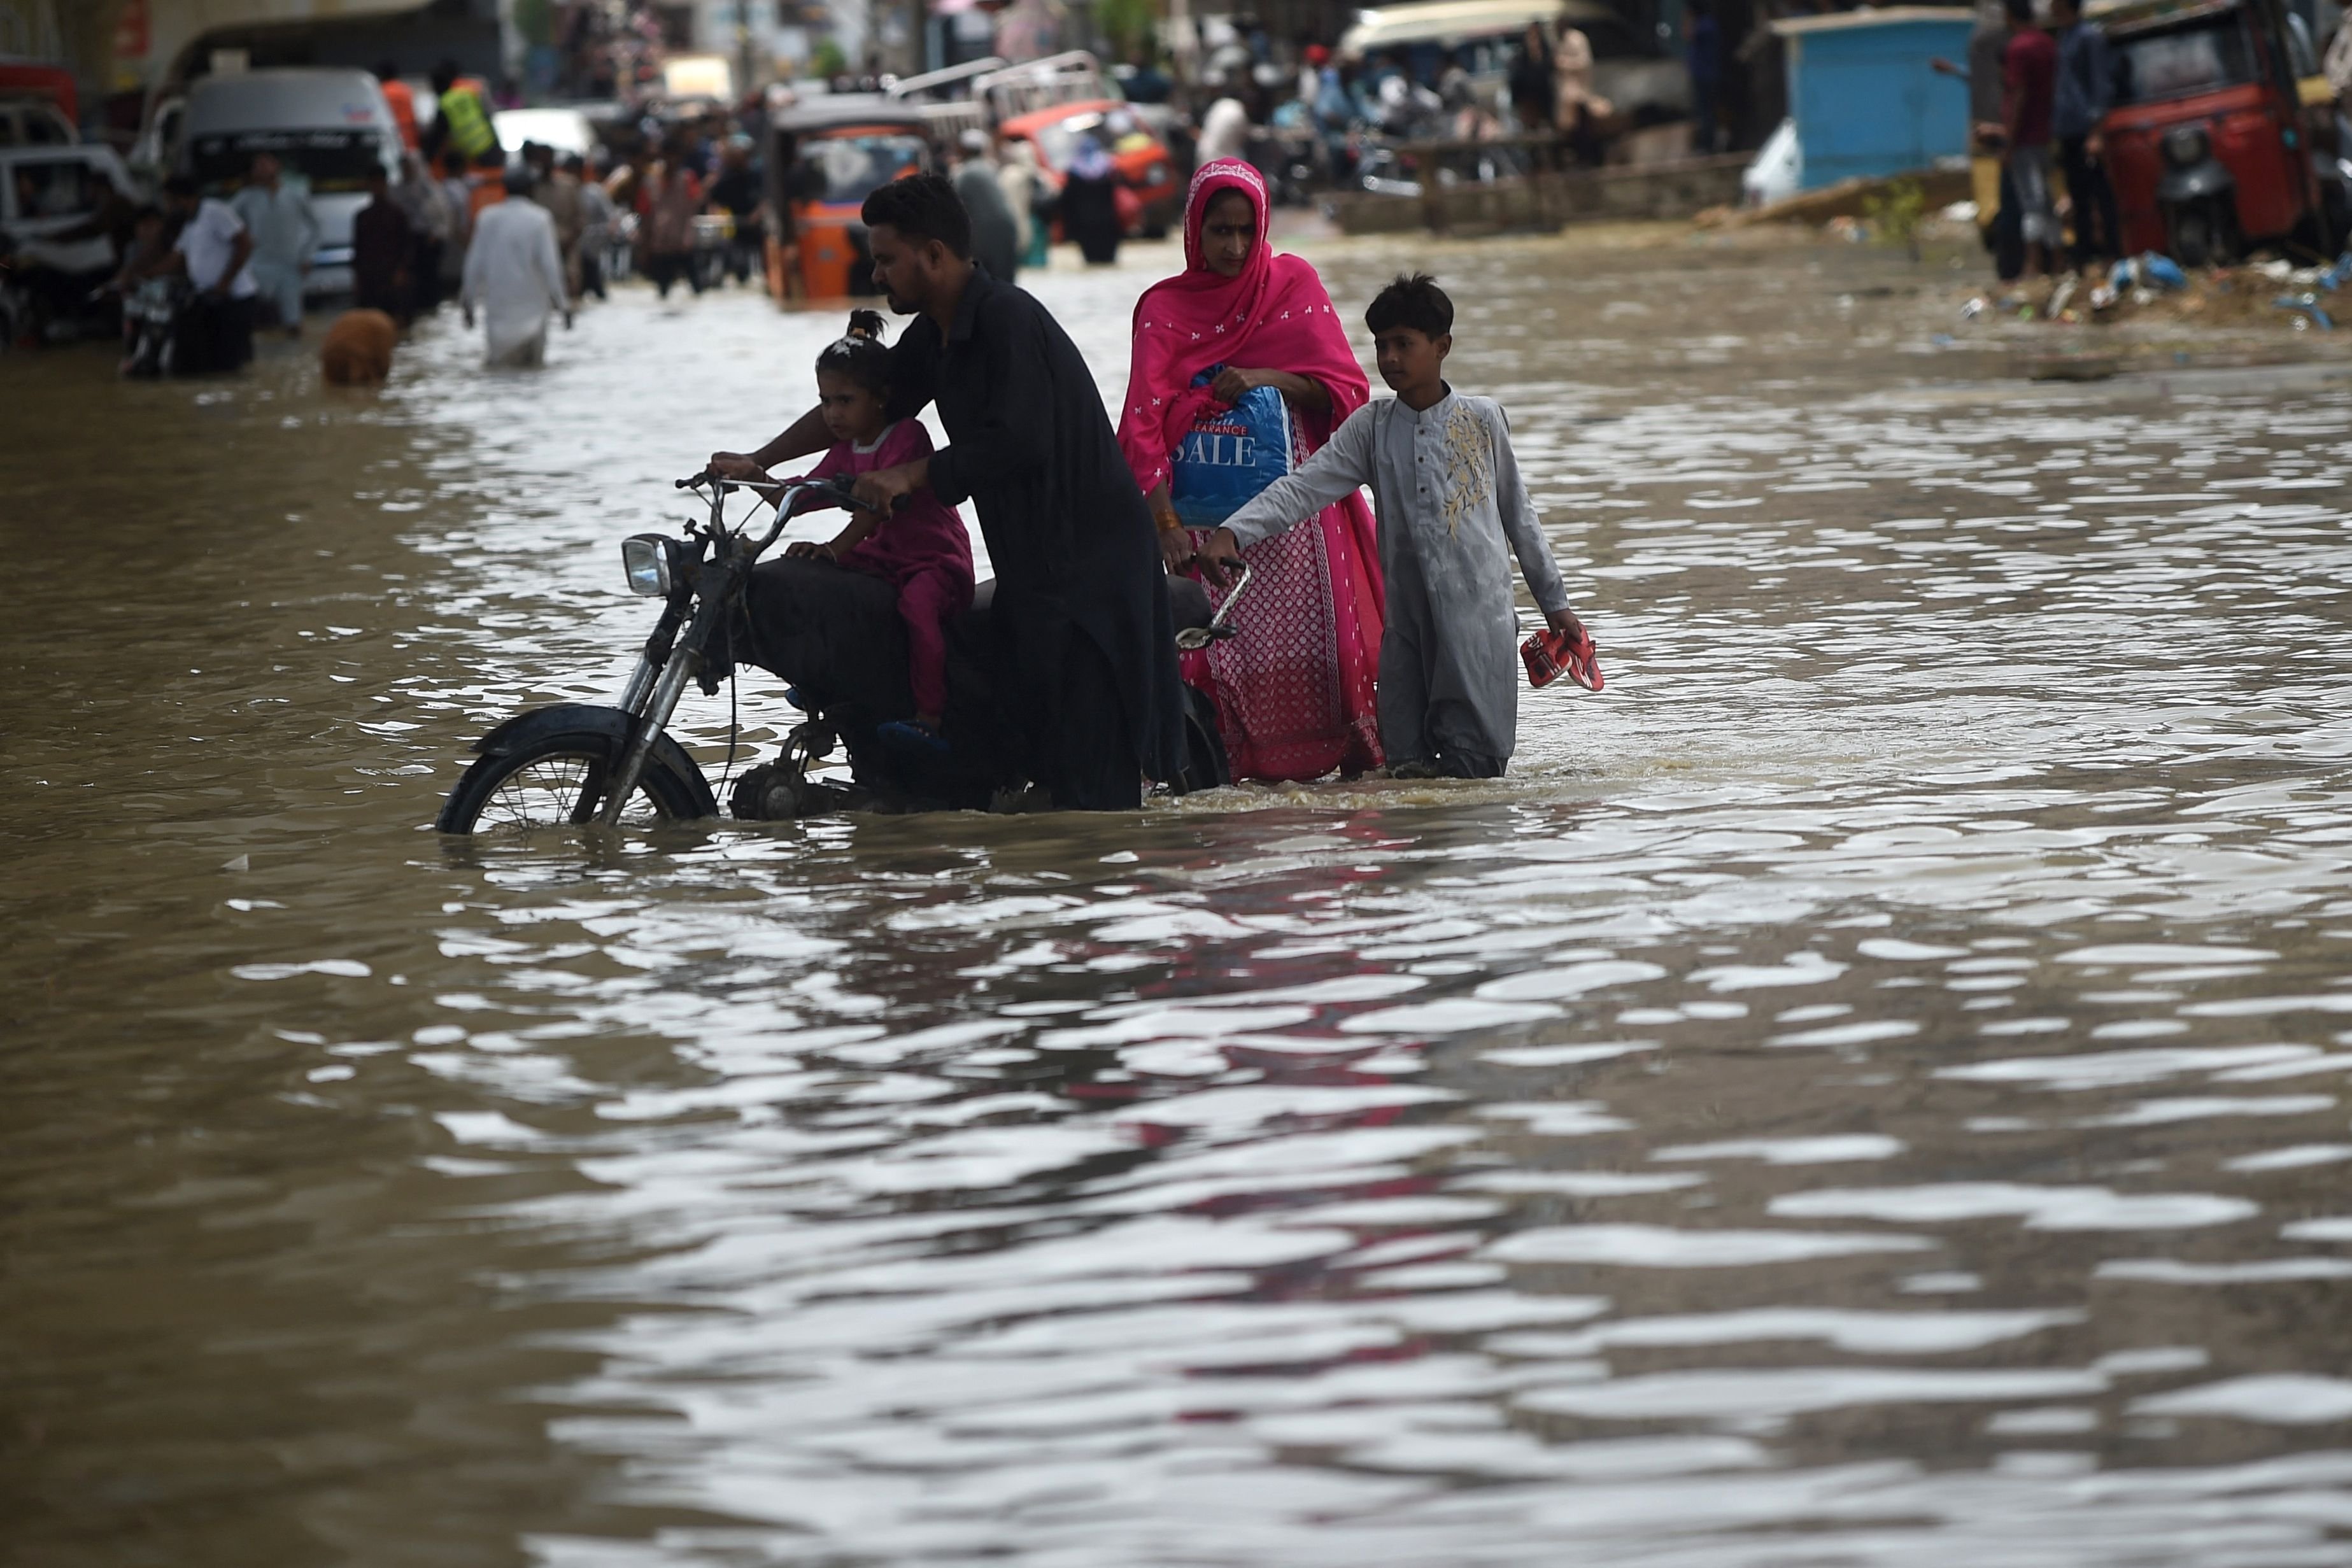 A family wades through a flooded street after a heavy rain shower in Karachi, Pakistan, July 11, 2022. (AFP Photo)